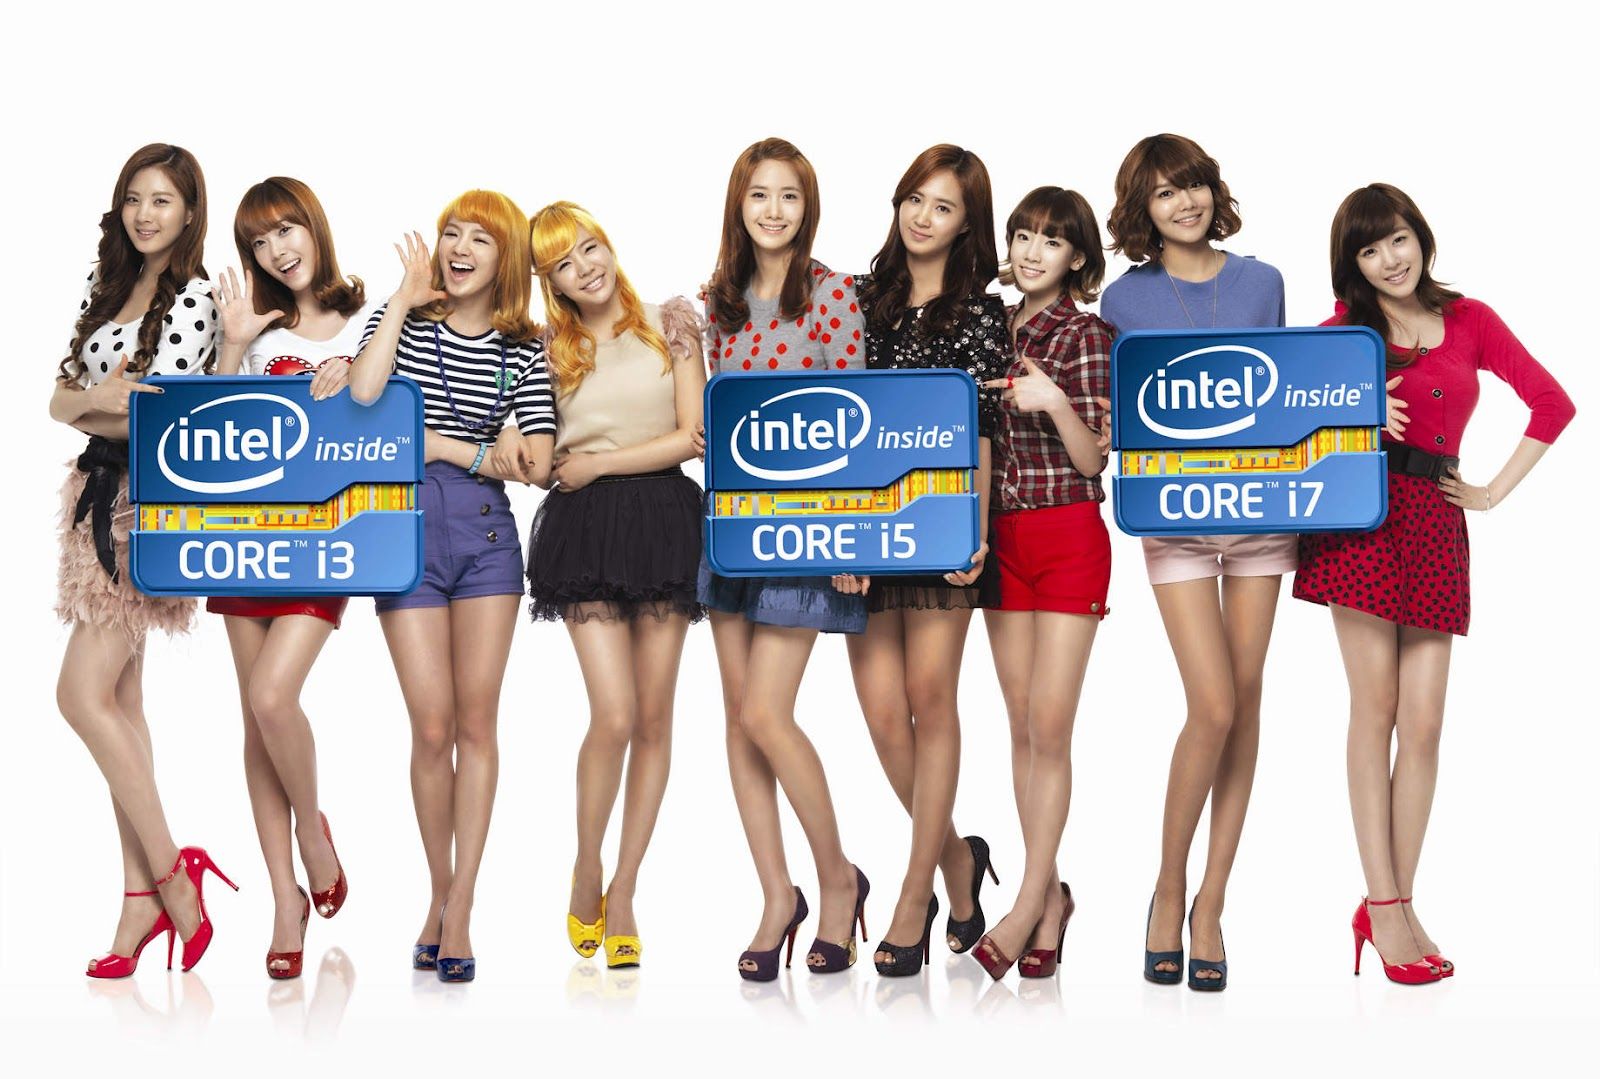 Wallpaper Collection For Your Computer and Mobile Phones: Intel Core i7 Wallpaper